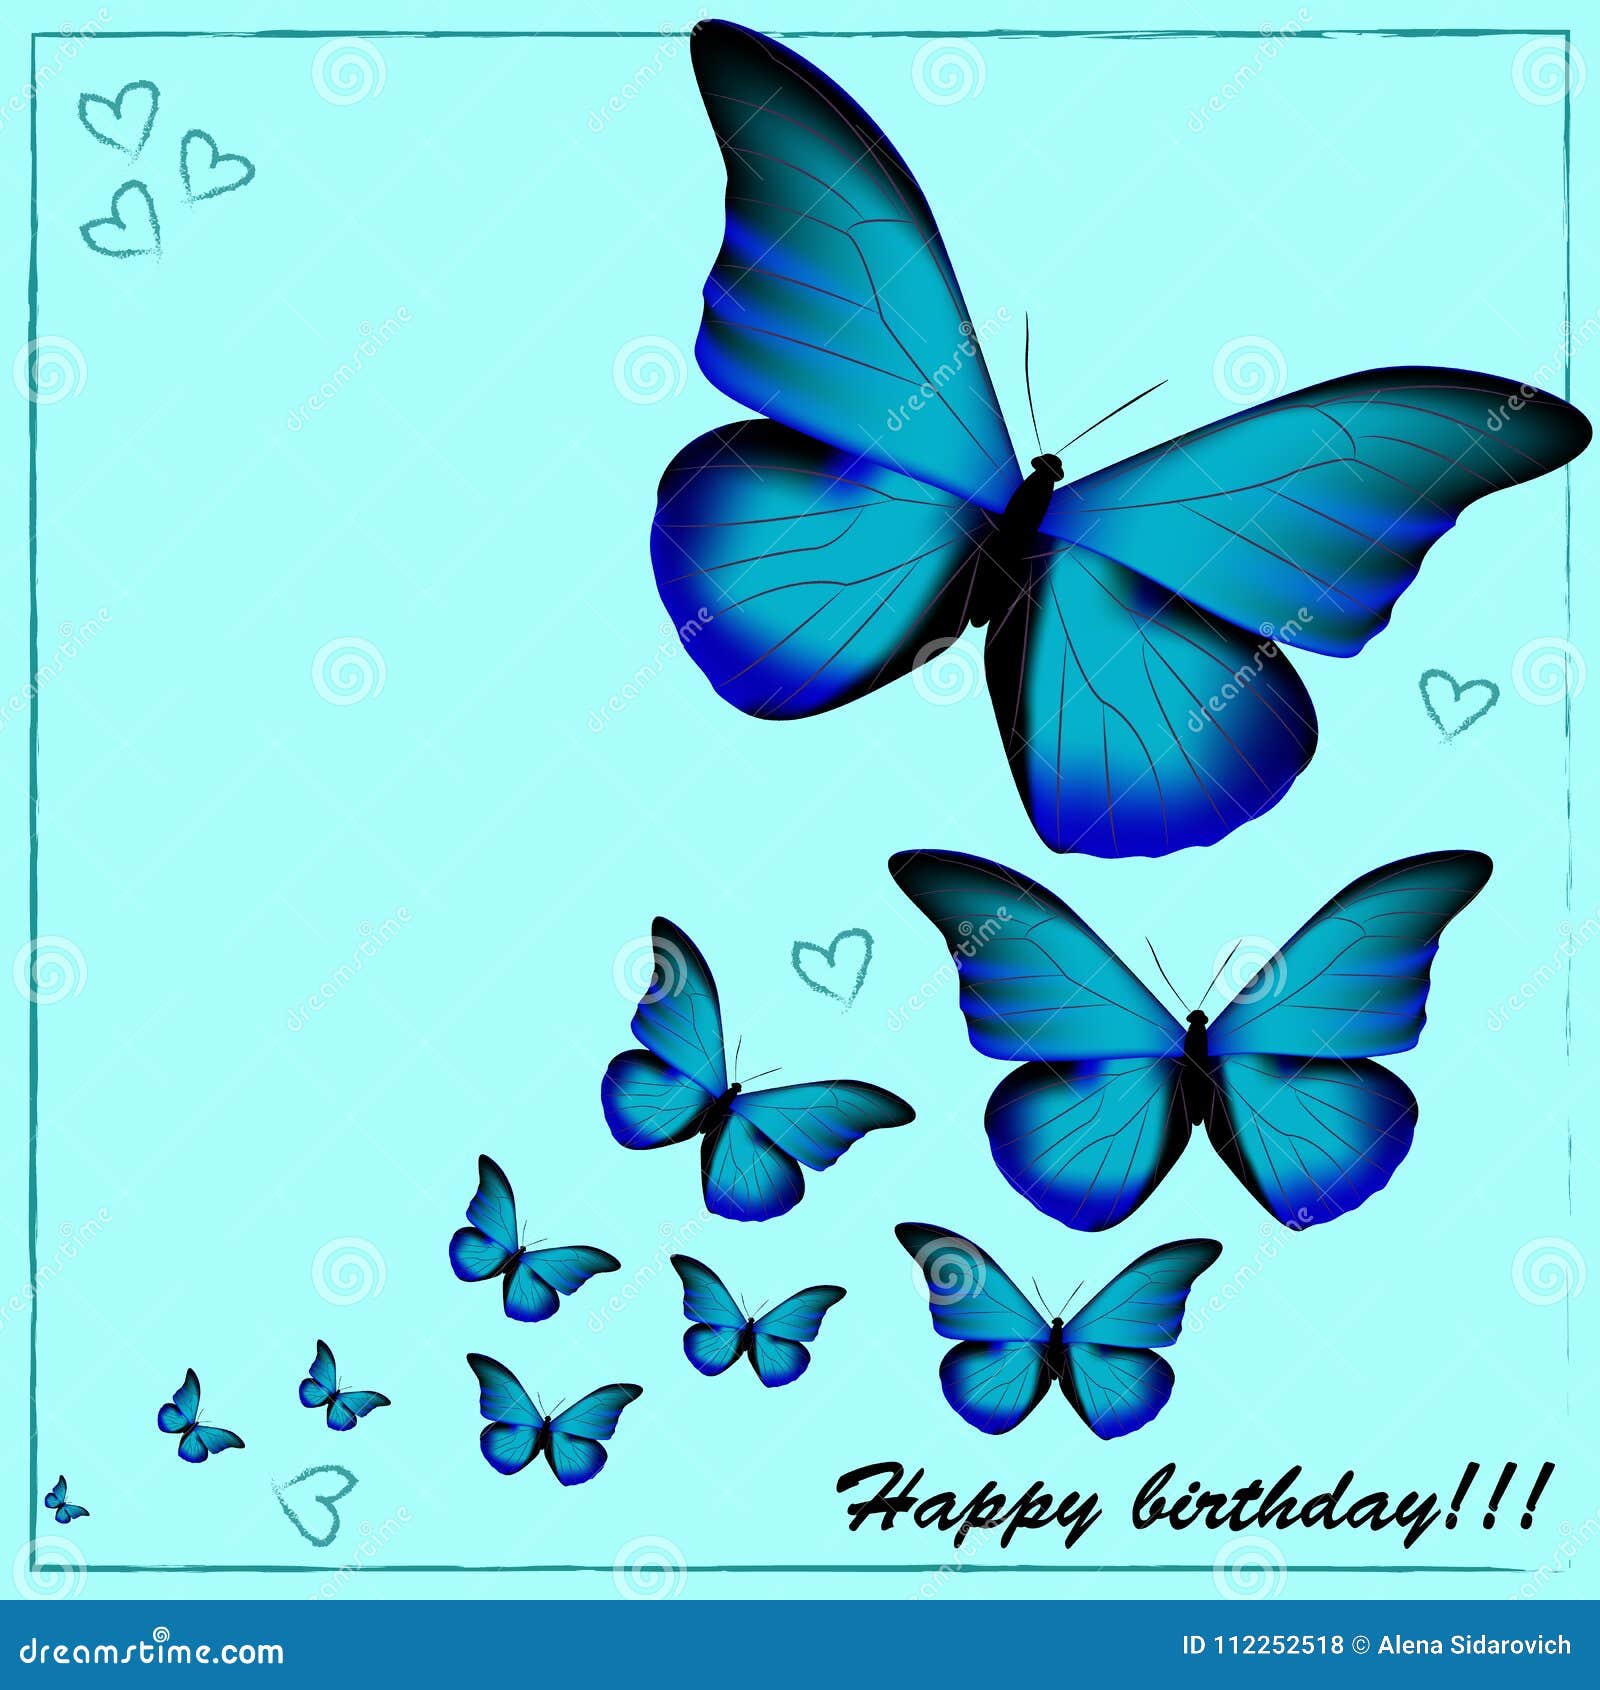 Postcard With A Happy Birthday Many Blue Butterflies On A Blue Stock